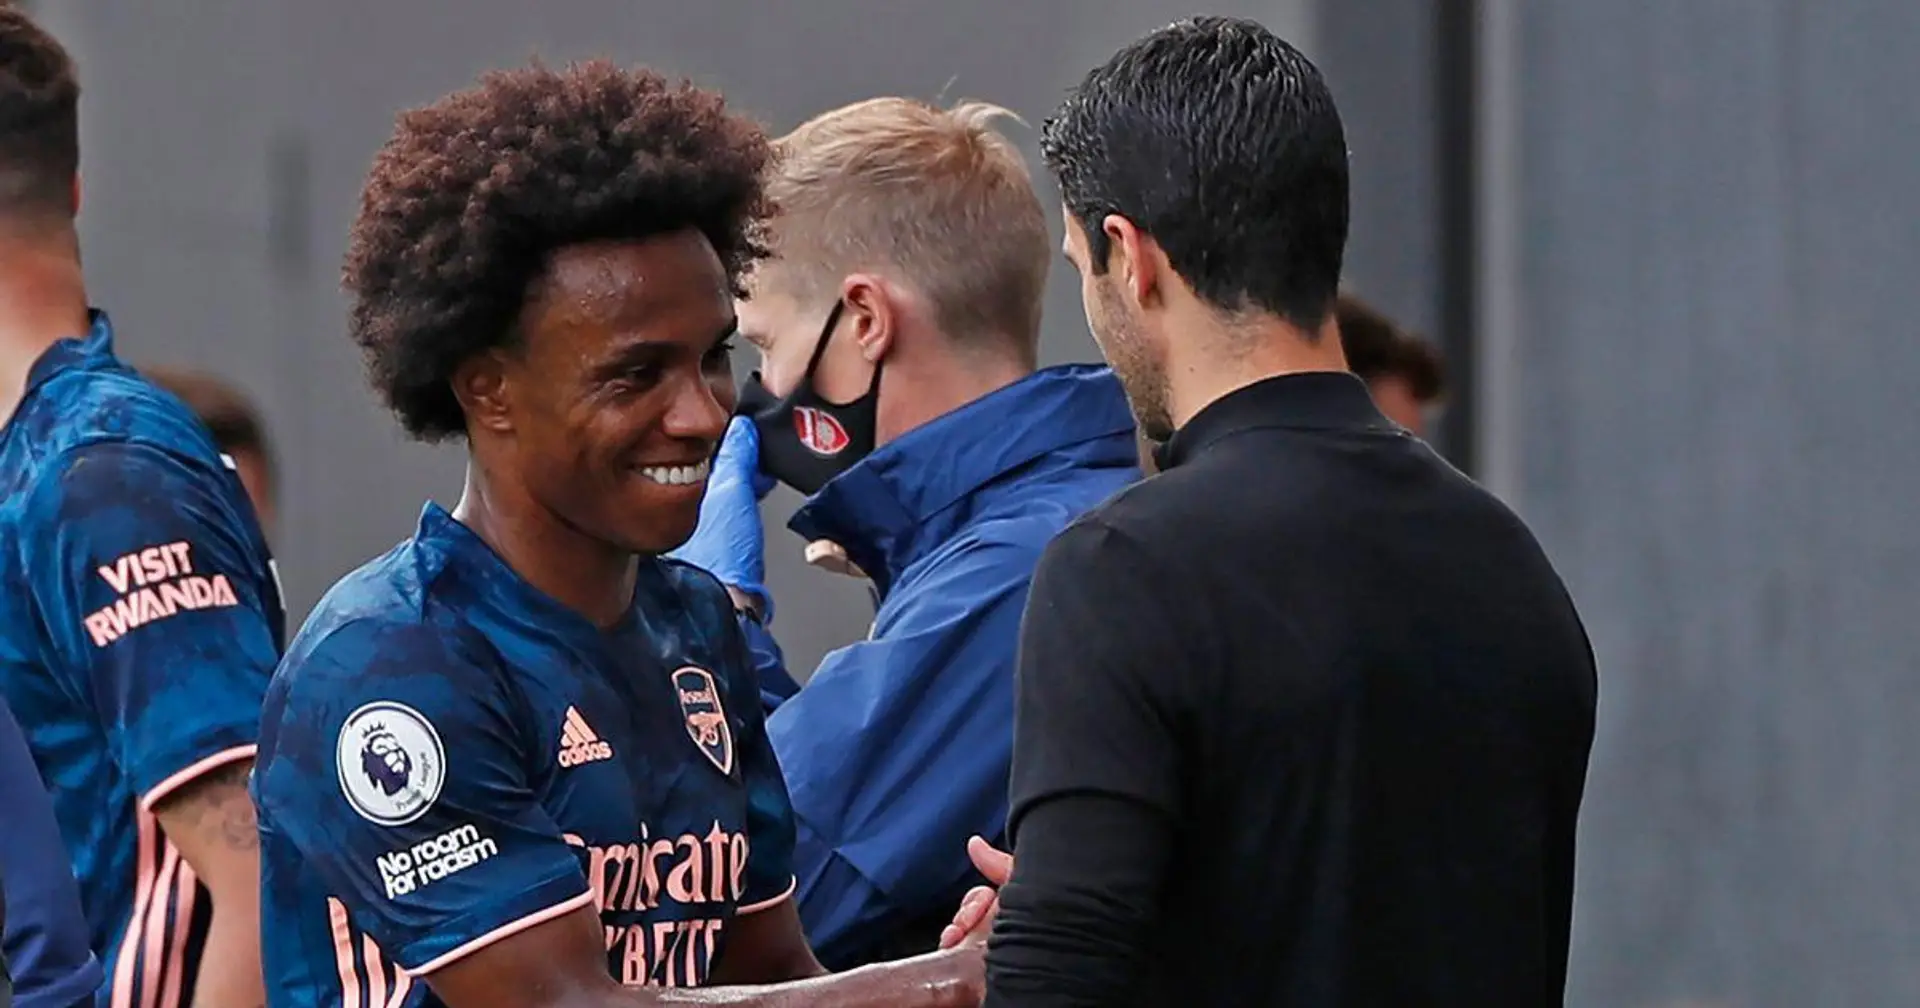 'Hungry' Willian out for more trophies: Arteta hails 'role model' Brazilian after dream debut